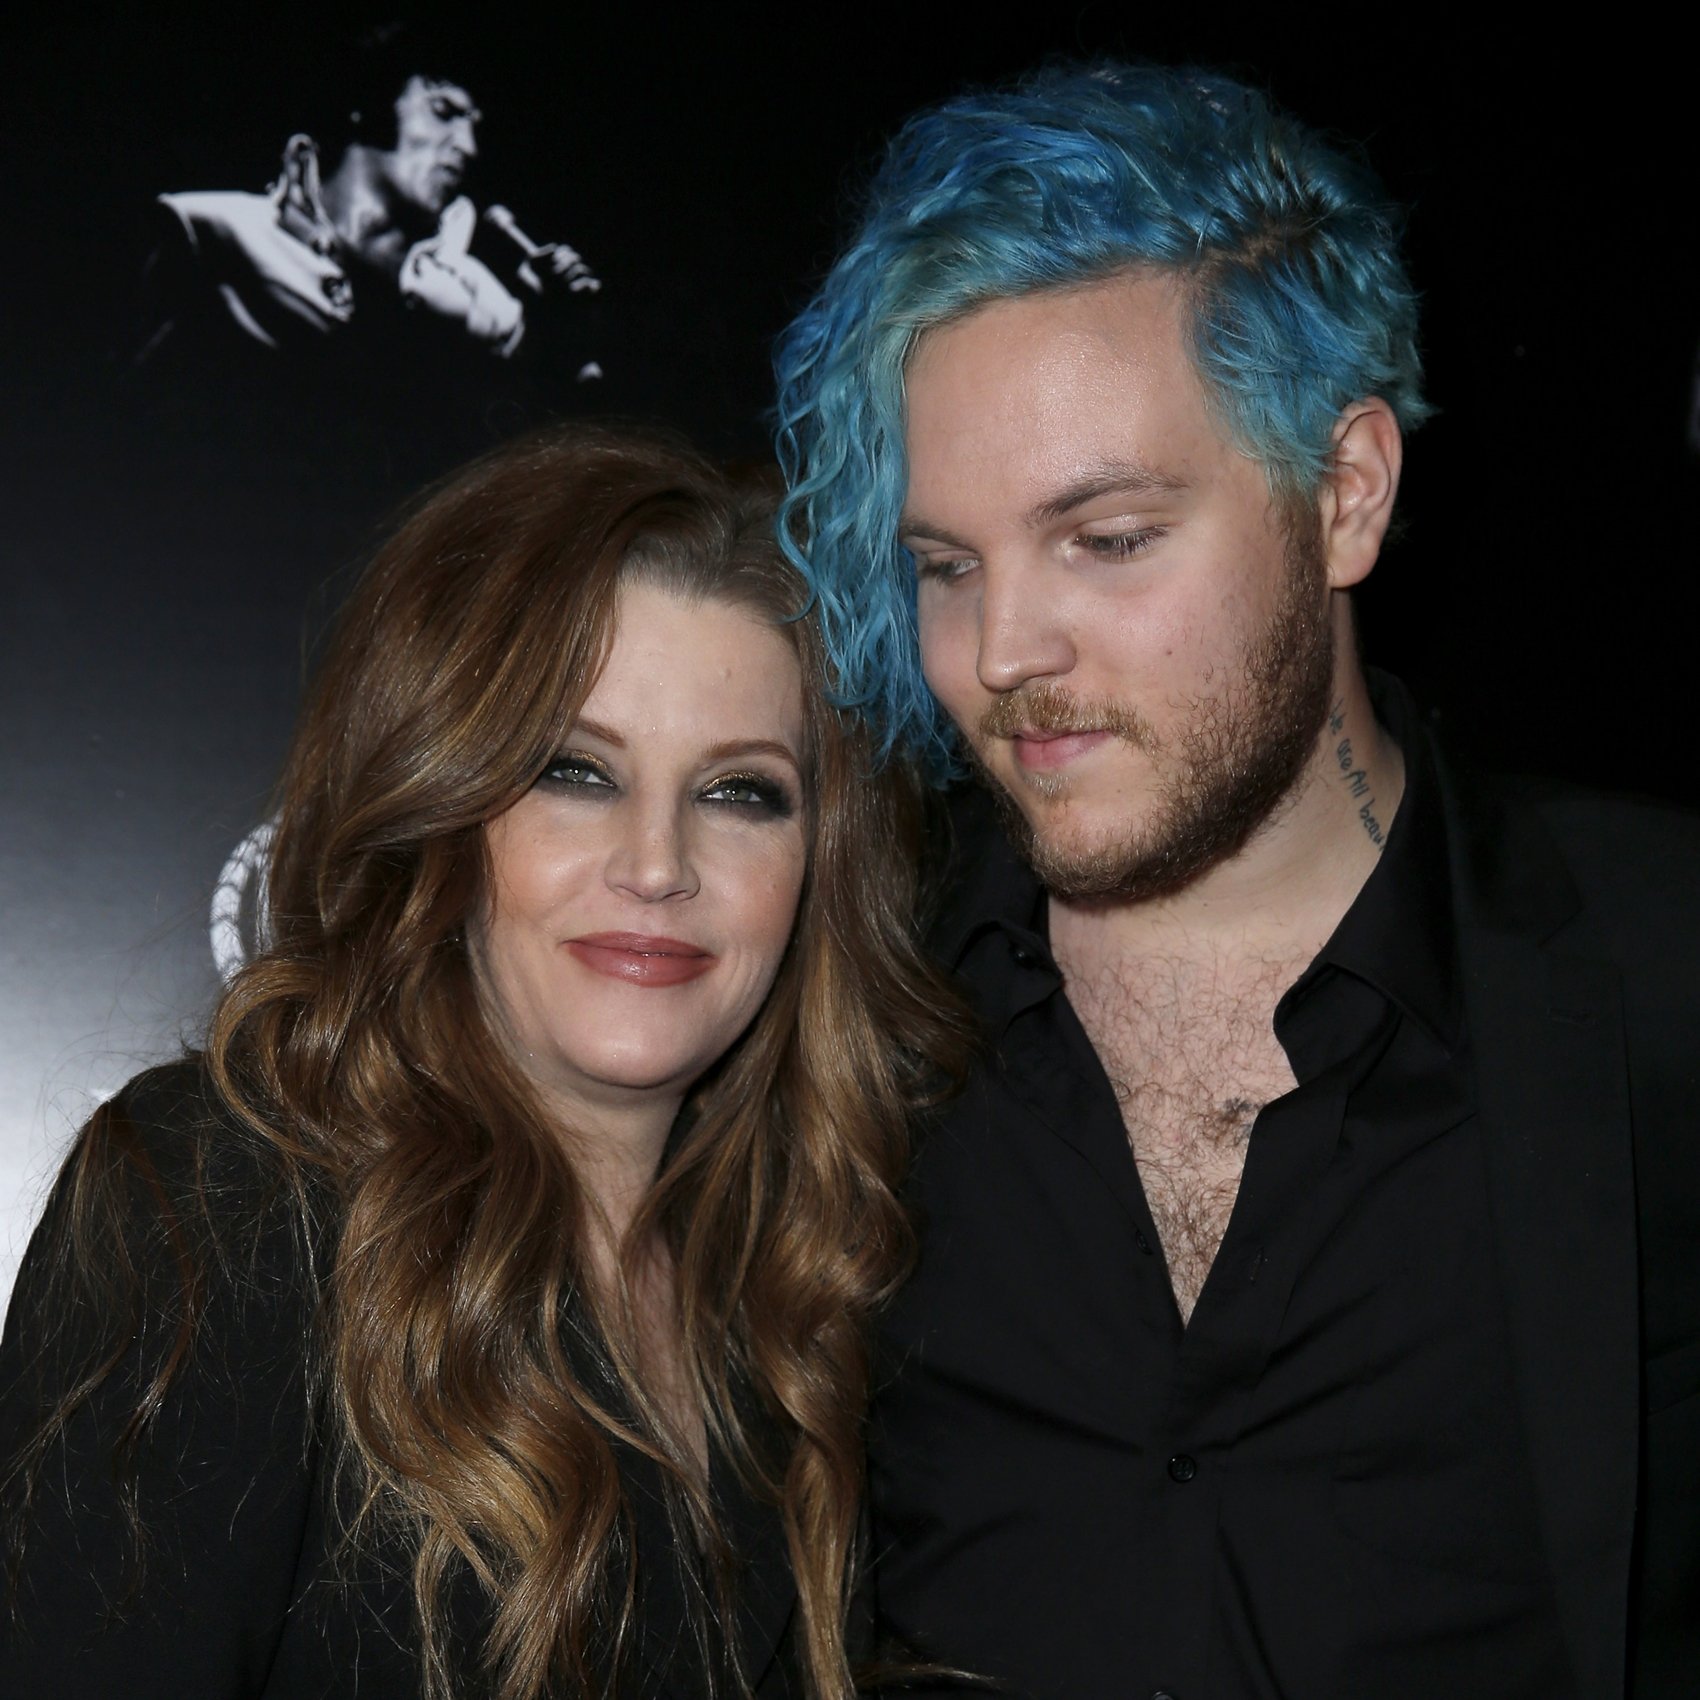 Lisa Marie Presley's son Benjamin Keough died at the age of 27 in July 2020